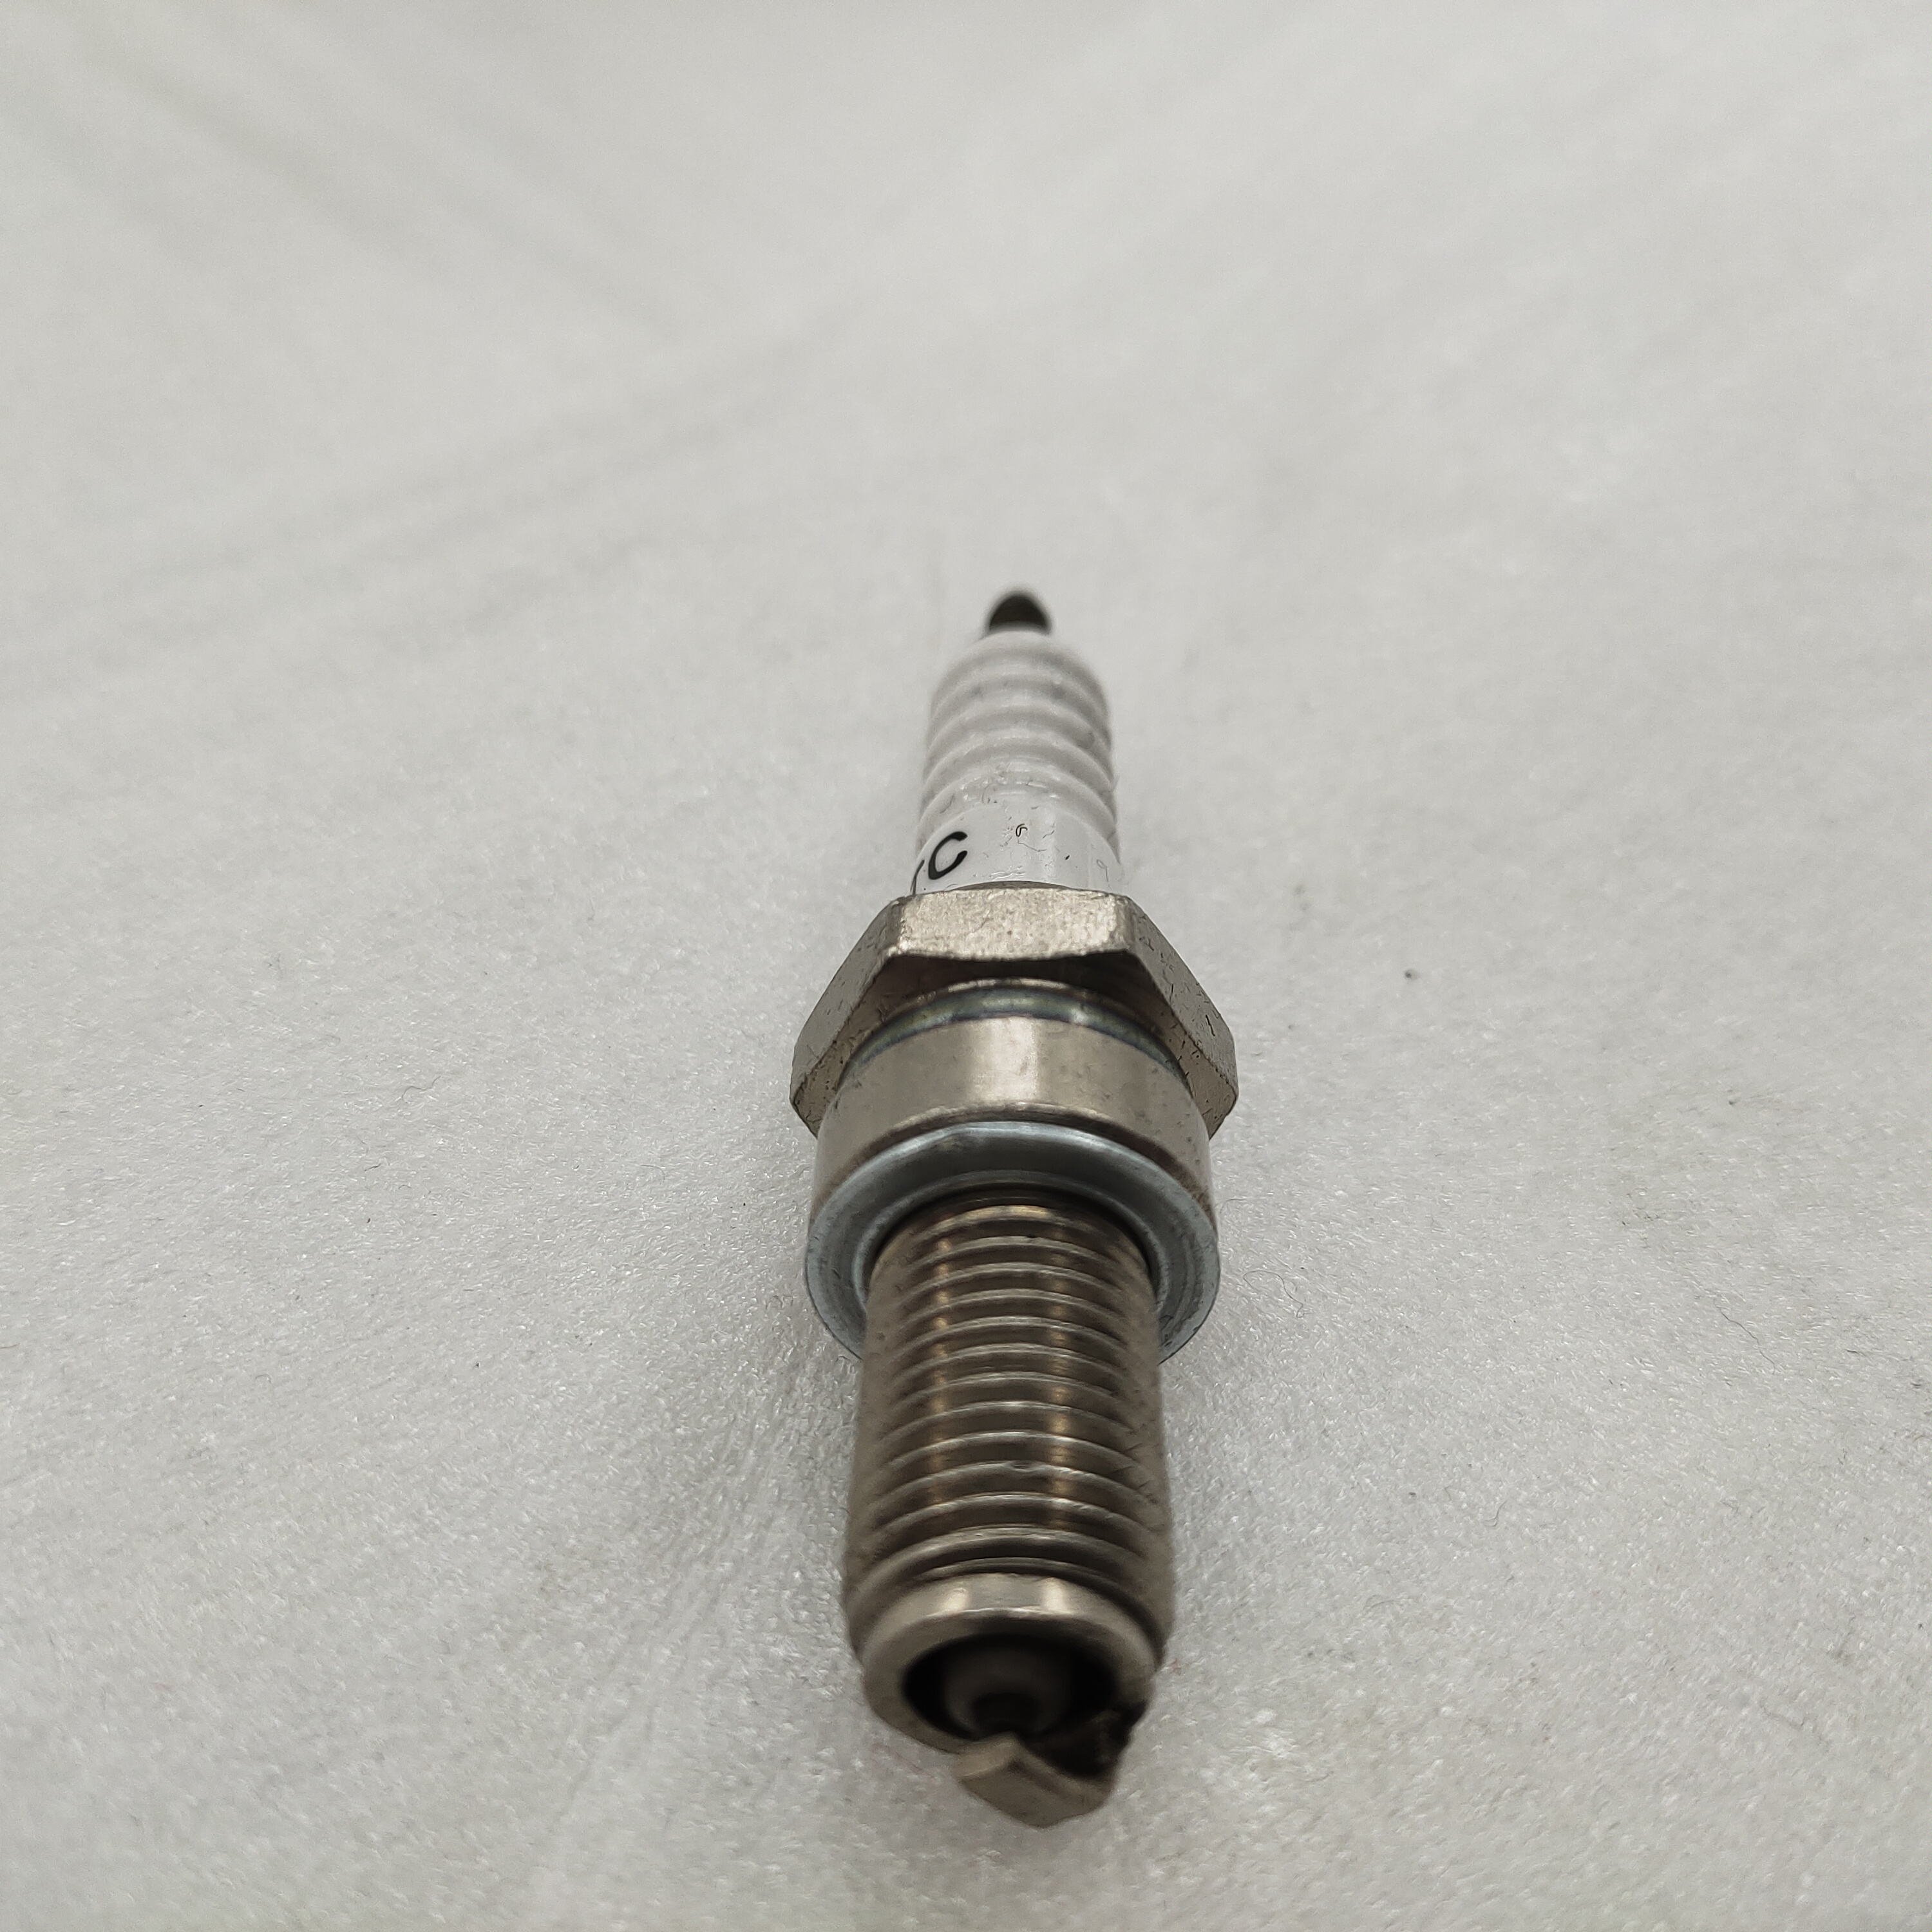 tricycle engine spare parts Spark plug lower emissions for lifan engine 250cc water cooled engine  spark plug